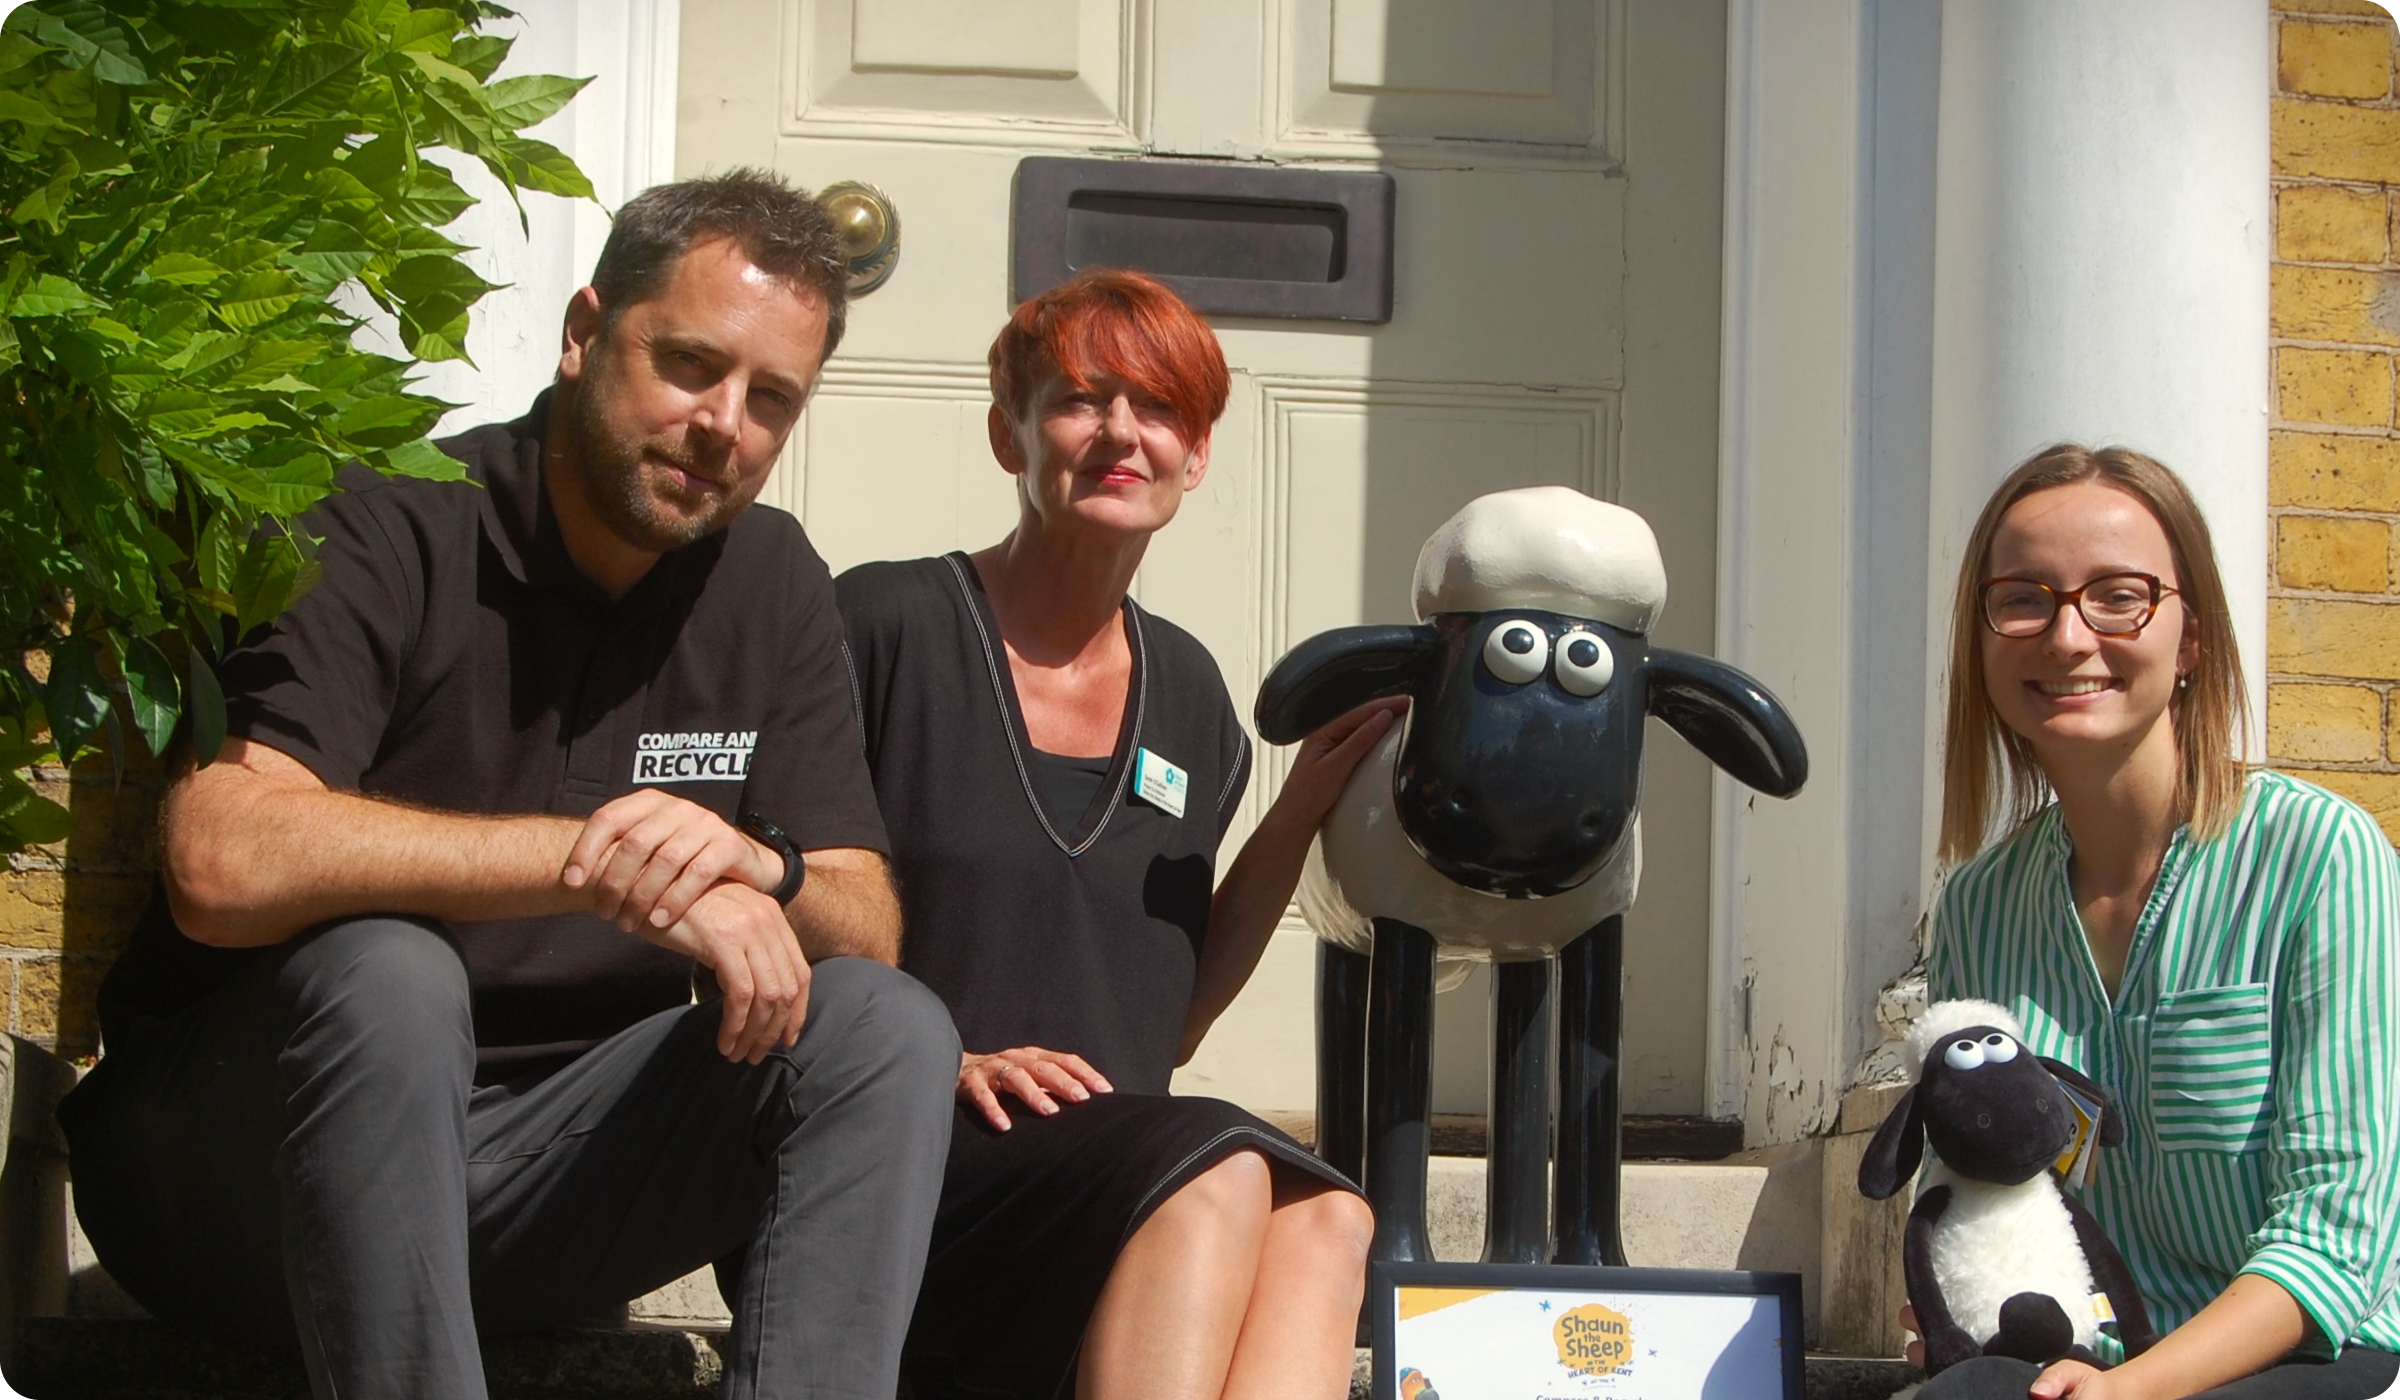 Tim Nicholson, Antonia Hristov from Compare and Recycle with Sarah O'Sullivan from Heart of Kent Hospice and little Shaun The Sheep character